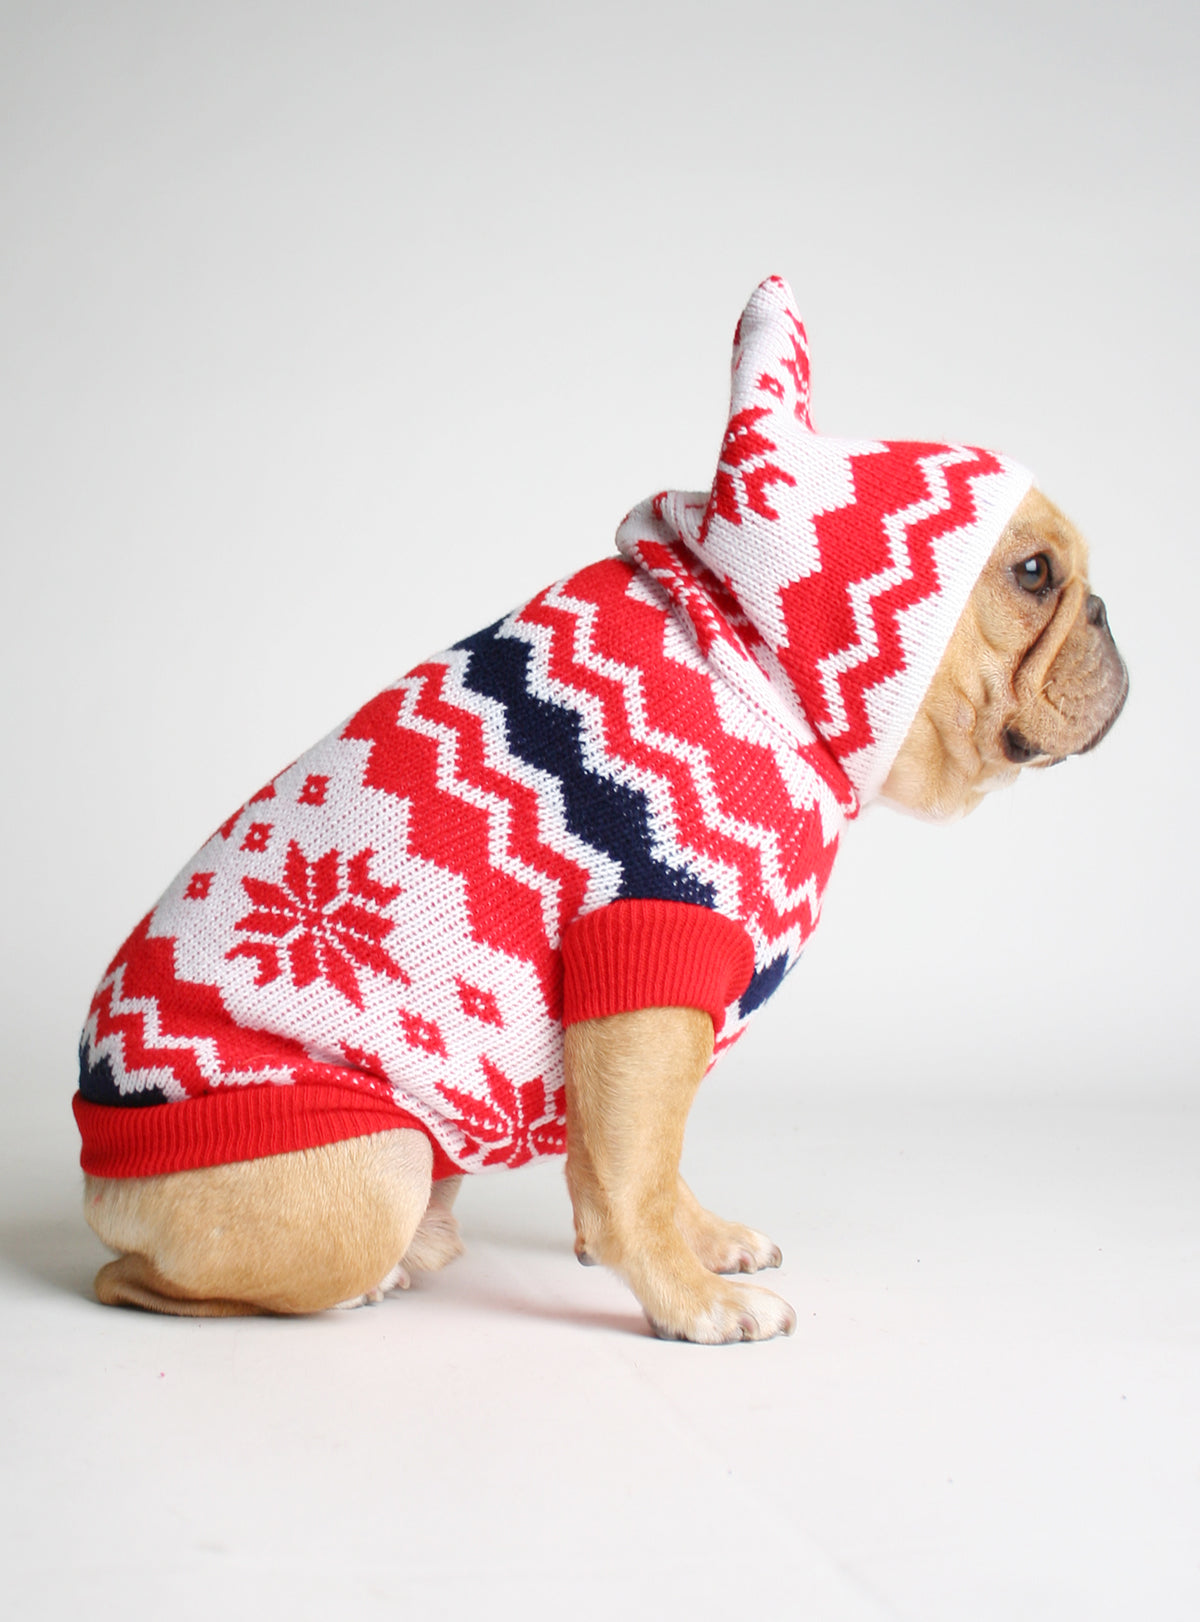 The Frostbite Dog Sweater